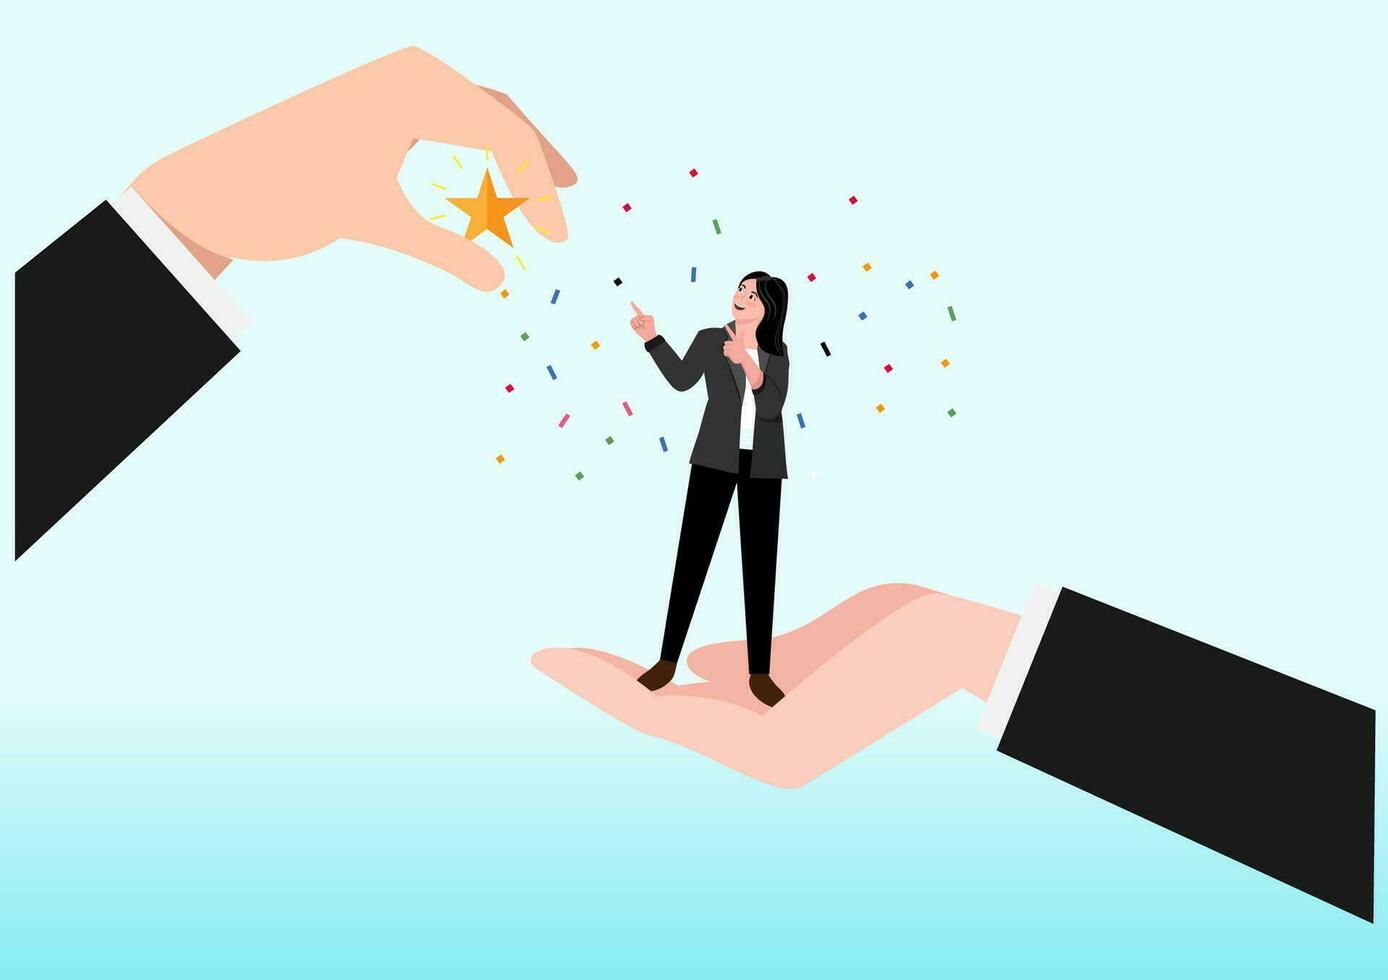 Employee success recognition, encourage and motivate best performance, cheering or honor on success or achievement concept, winning confidence businesswoman standing on big hand getting star reward. vector